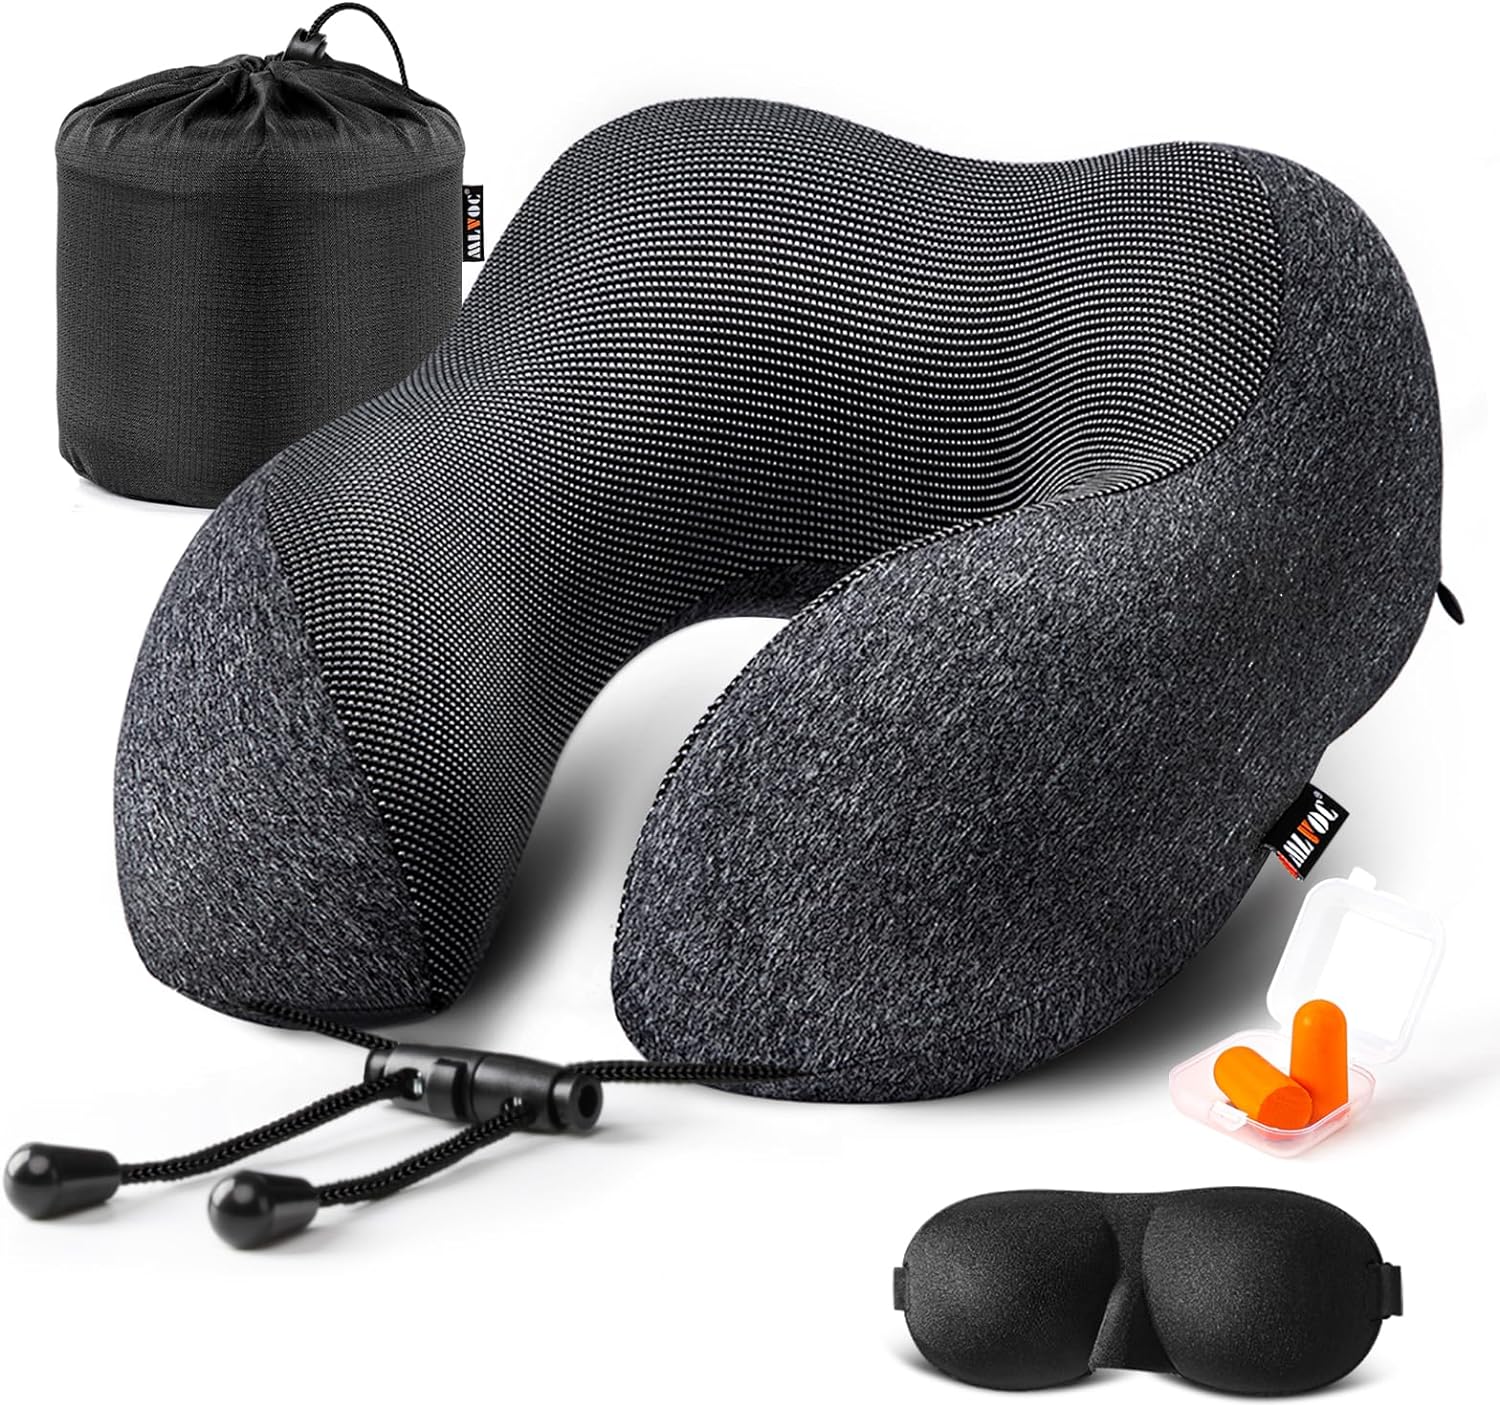 Twist Memory Foam Travel Pillow for Neck, Chin, Lumbar and Leg Support -  For Traveling on Airplane, Bus, Train or at Home - Best for Side, Stomach  and